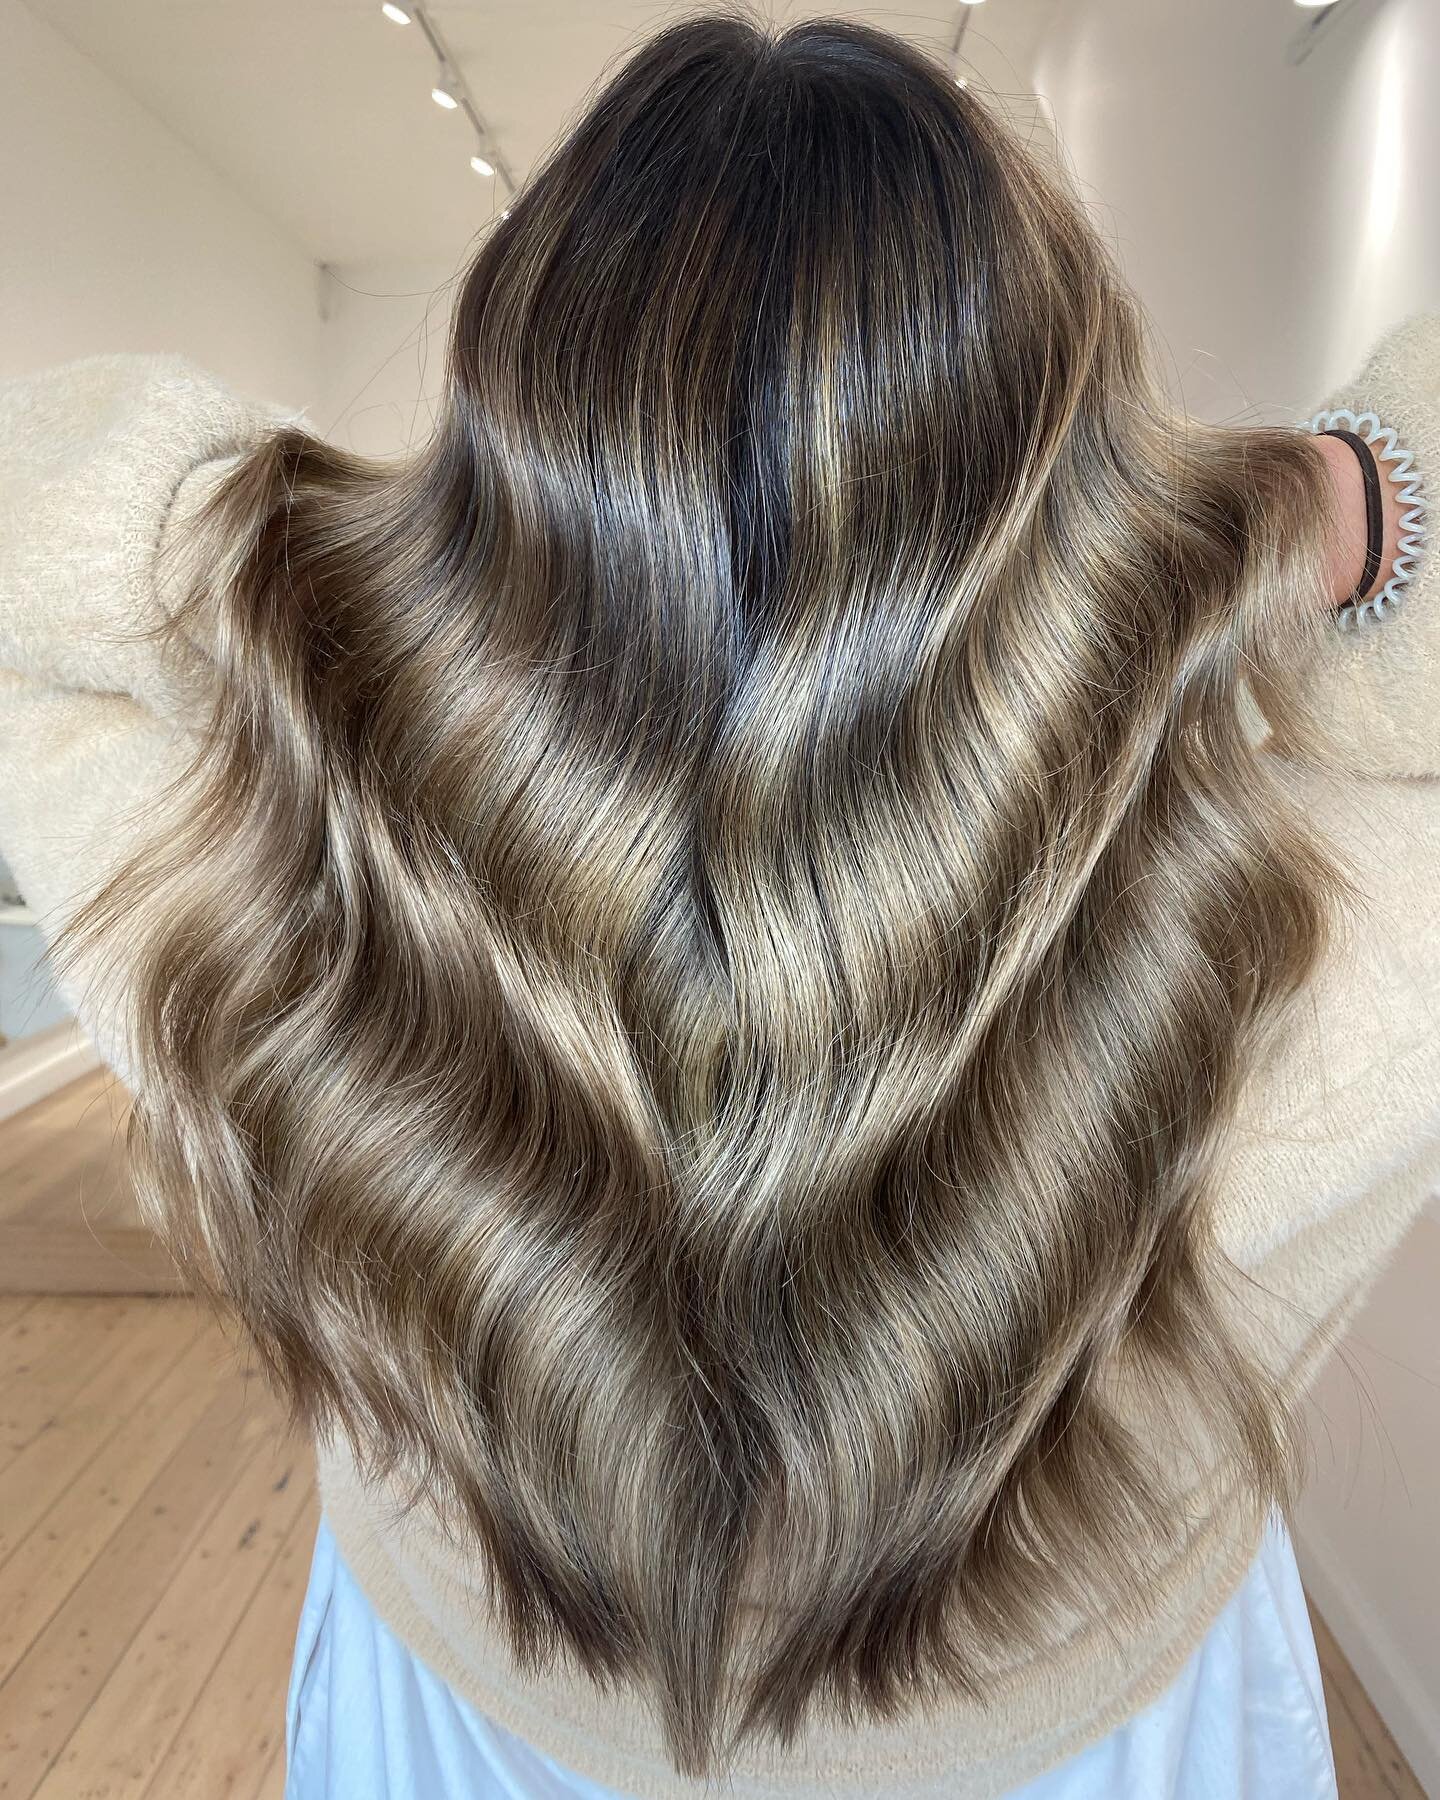 Seamless, glossy and dimensional = Dream hair vibes ☕️